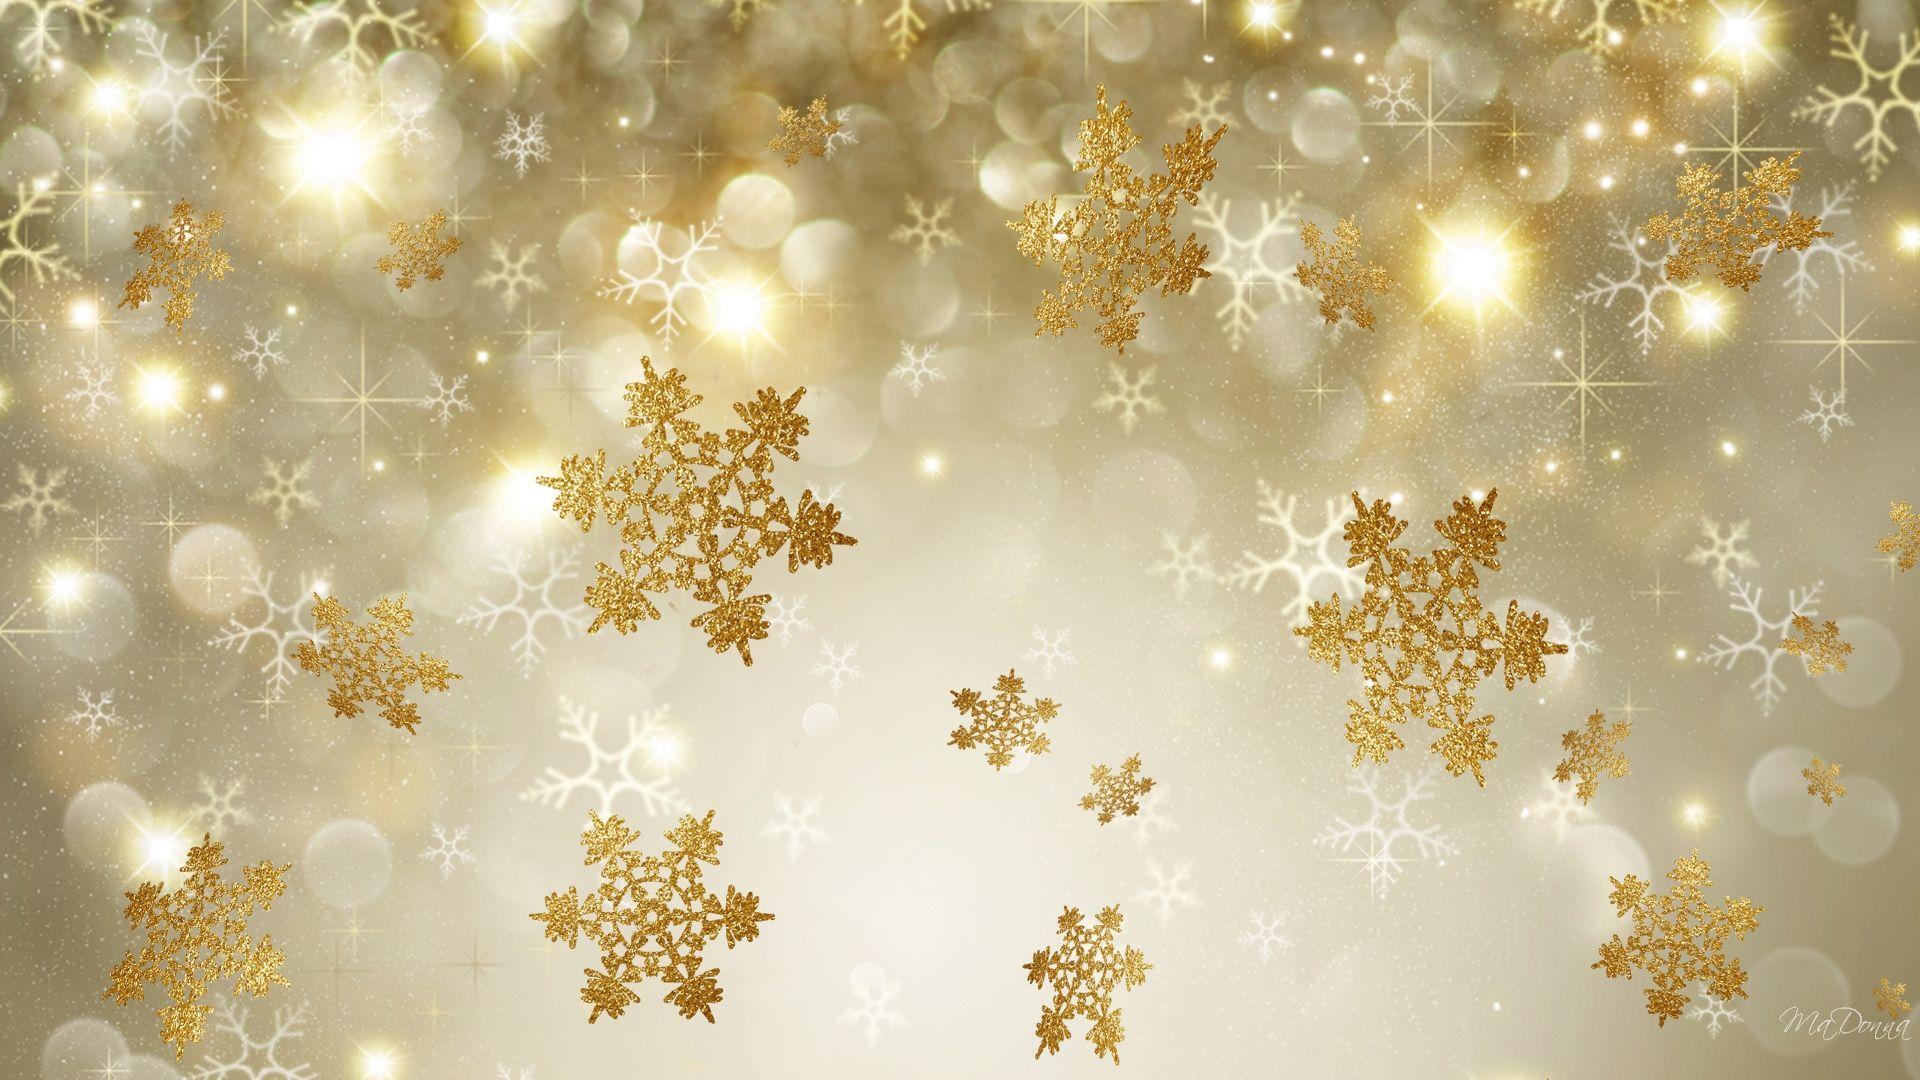 Golden Snowflakes HD Wallpaper. Background Imagex1080